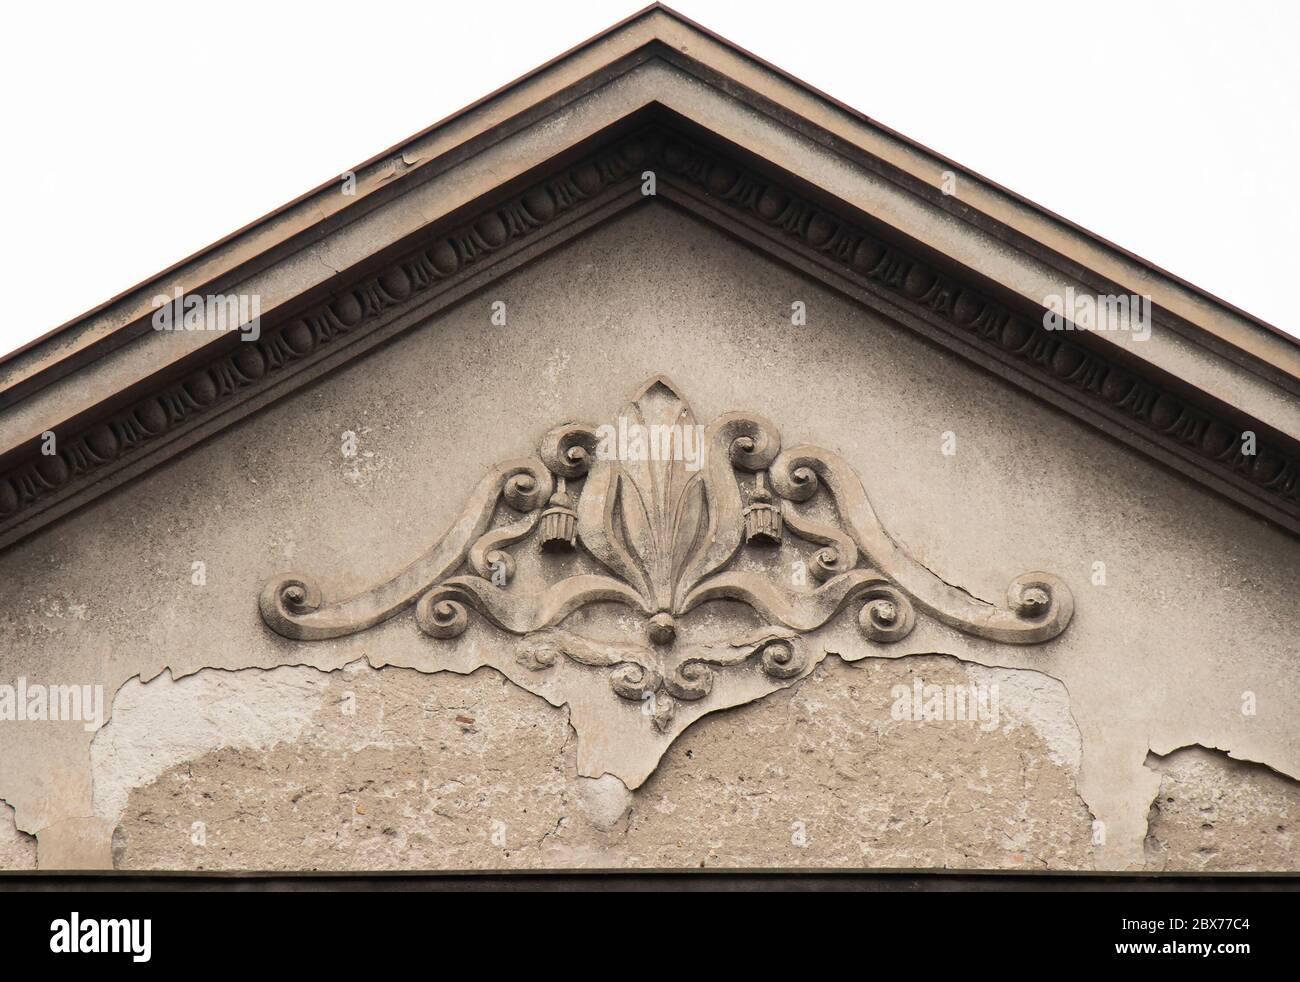 An architectural ornament relief on the top of front house facade, vintage  roof peak decoration Stock Photo - Alamy